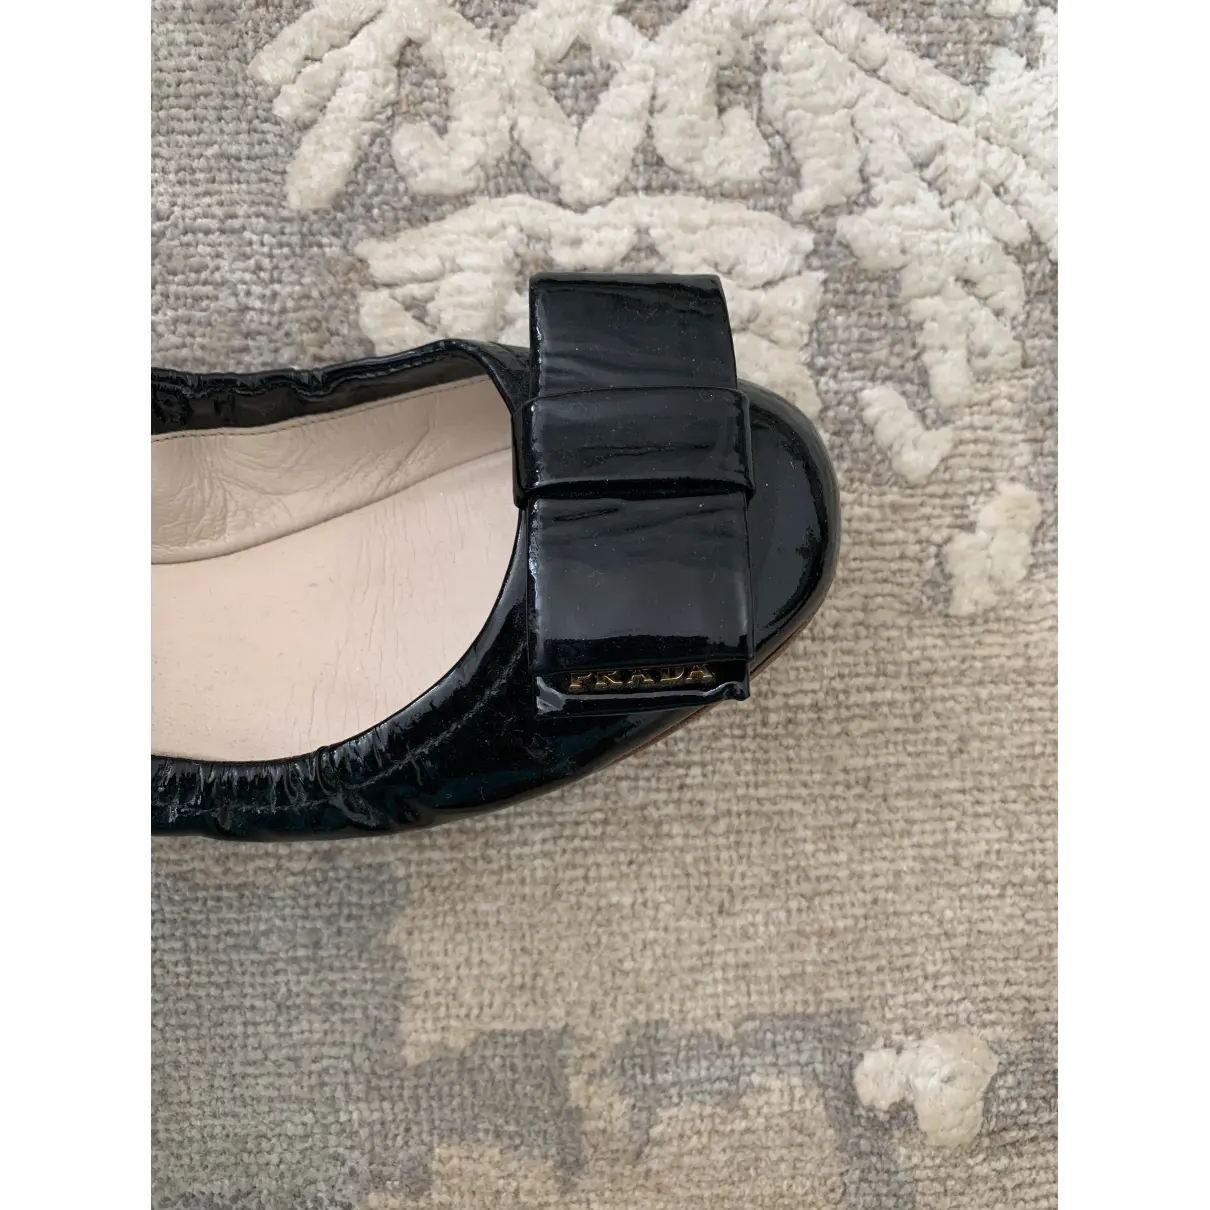 Prada Patent leather ballet flats for sale